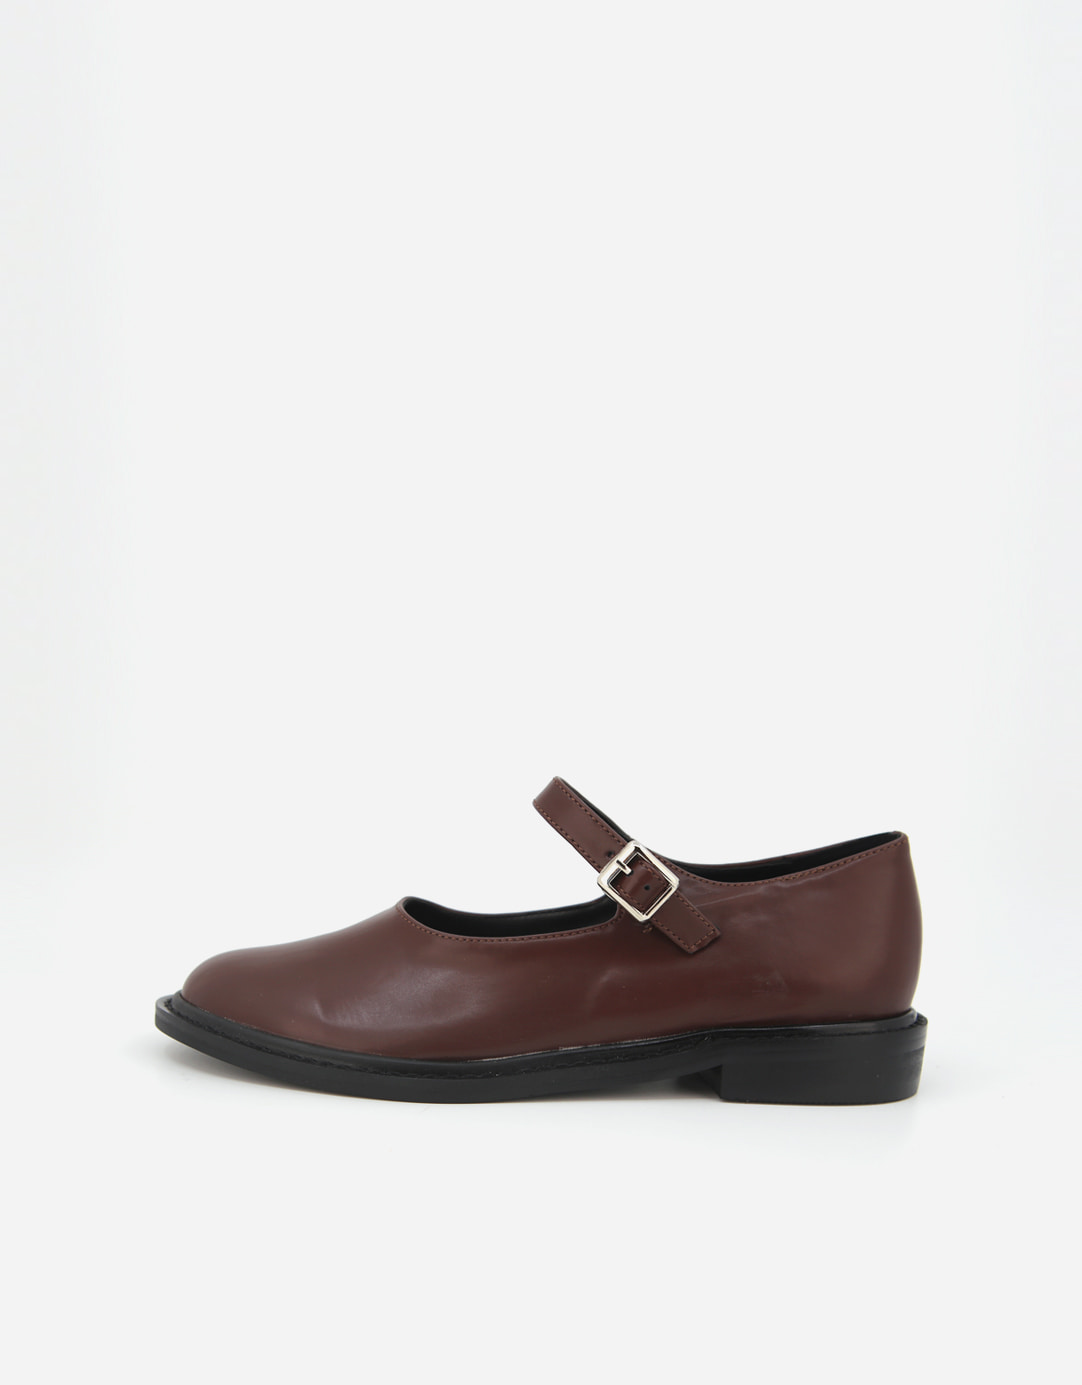 CLASSIC MARRY JANE LOAFER